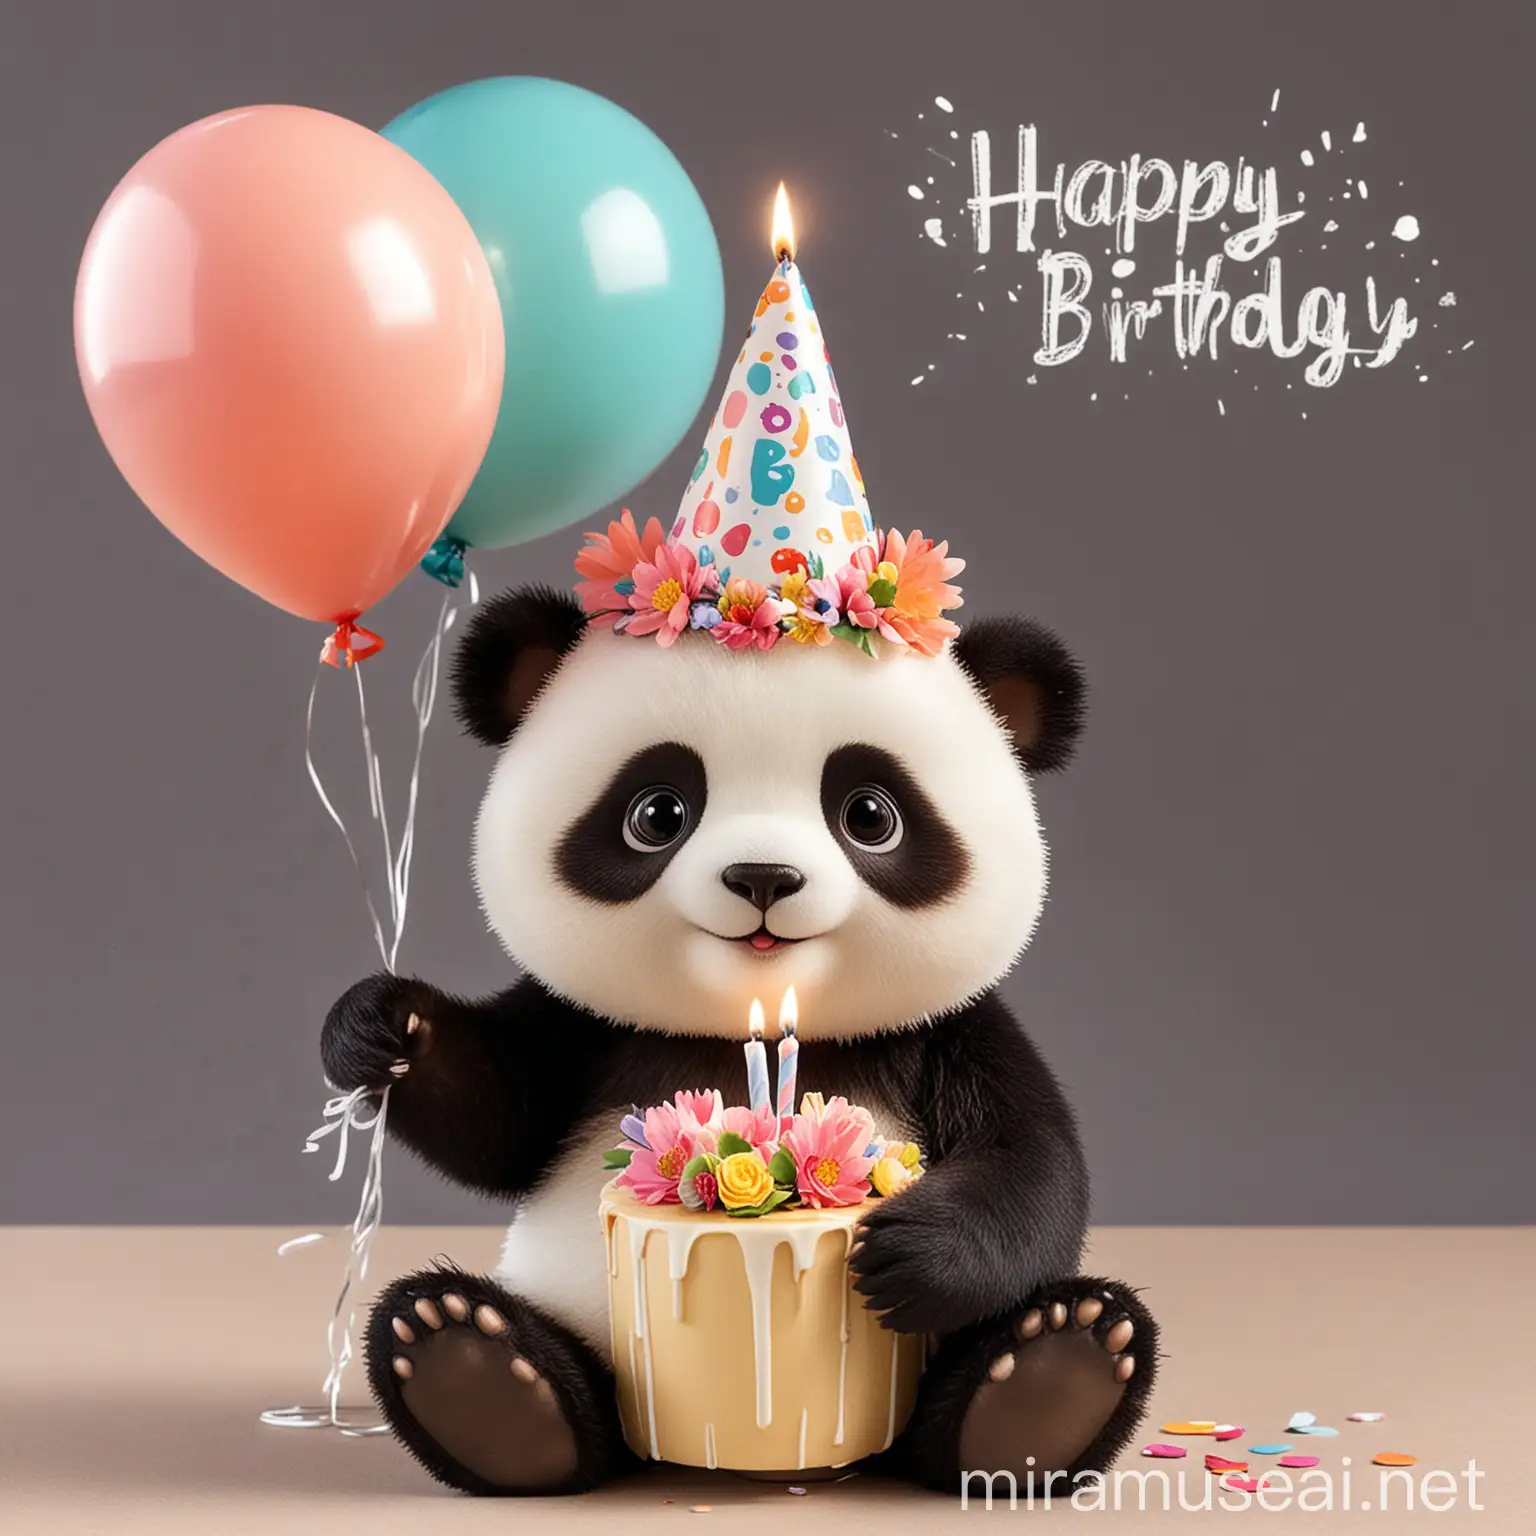 Happy Birthday Panda Celebration Card Adorable Panda with Cake Flowers Balloons and Gift